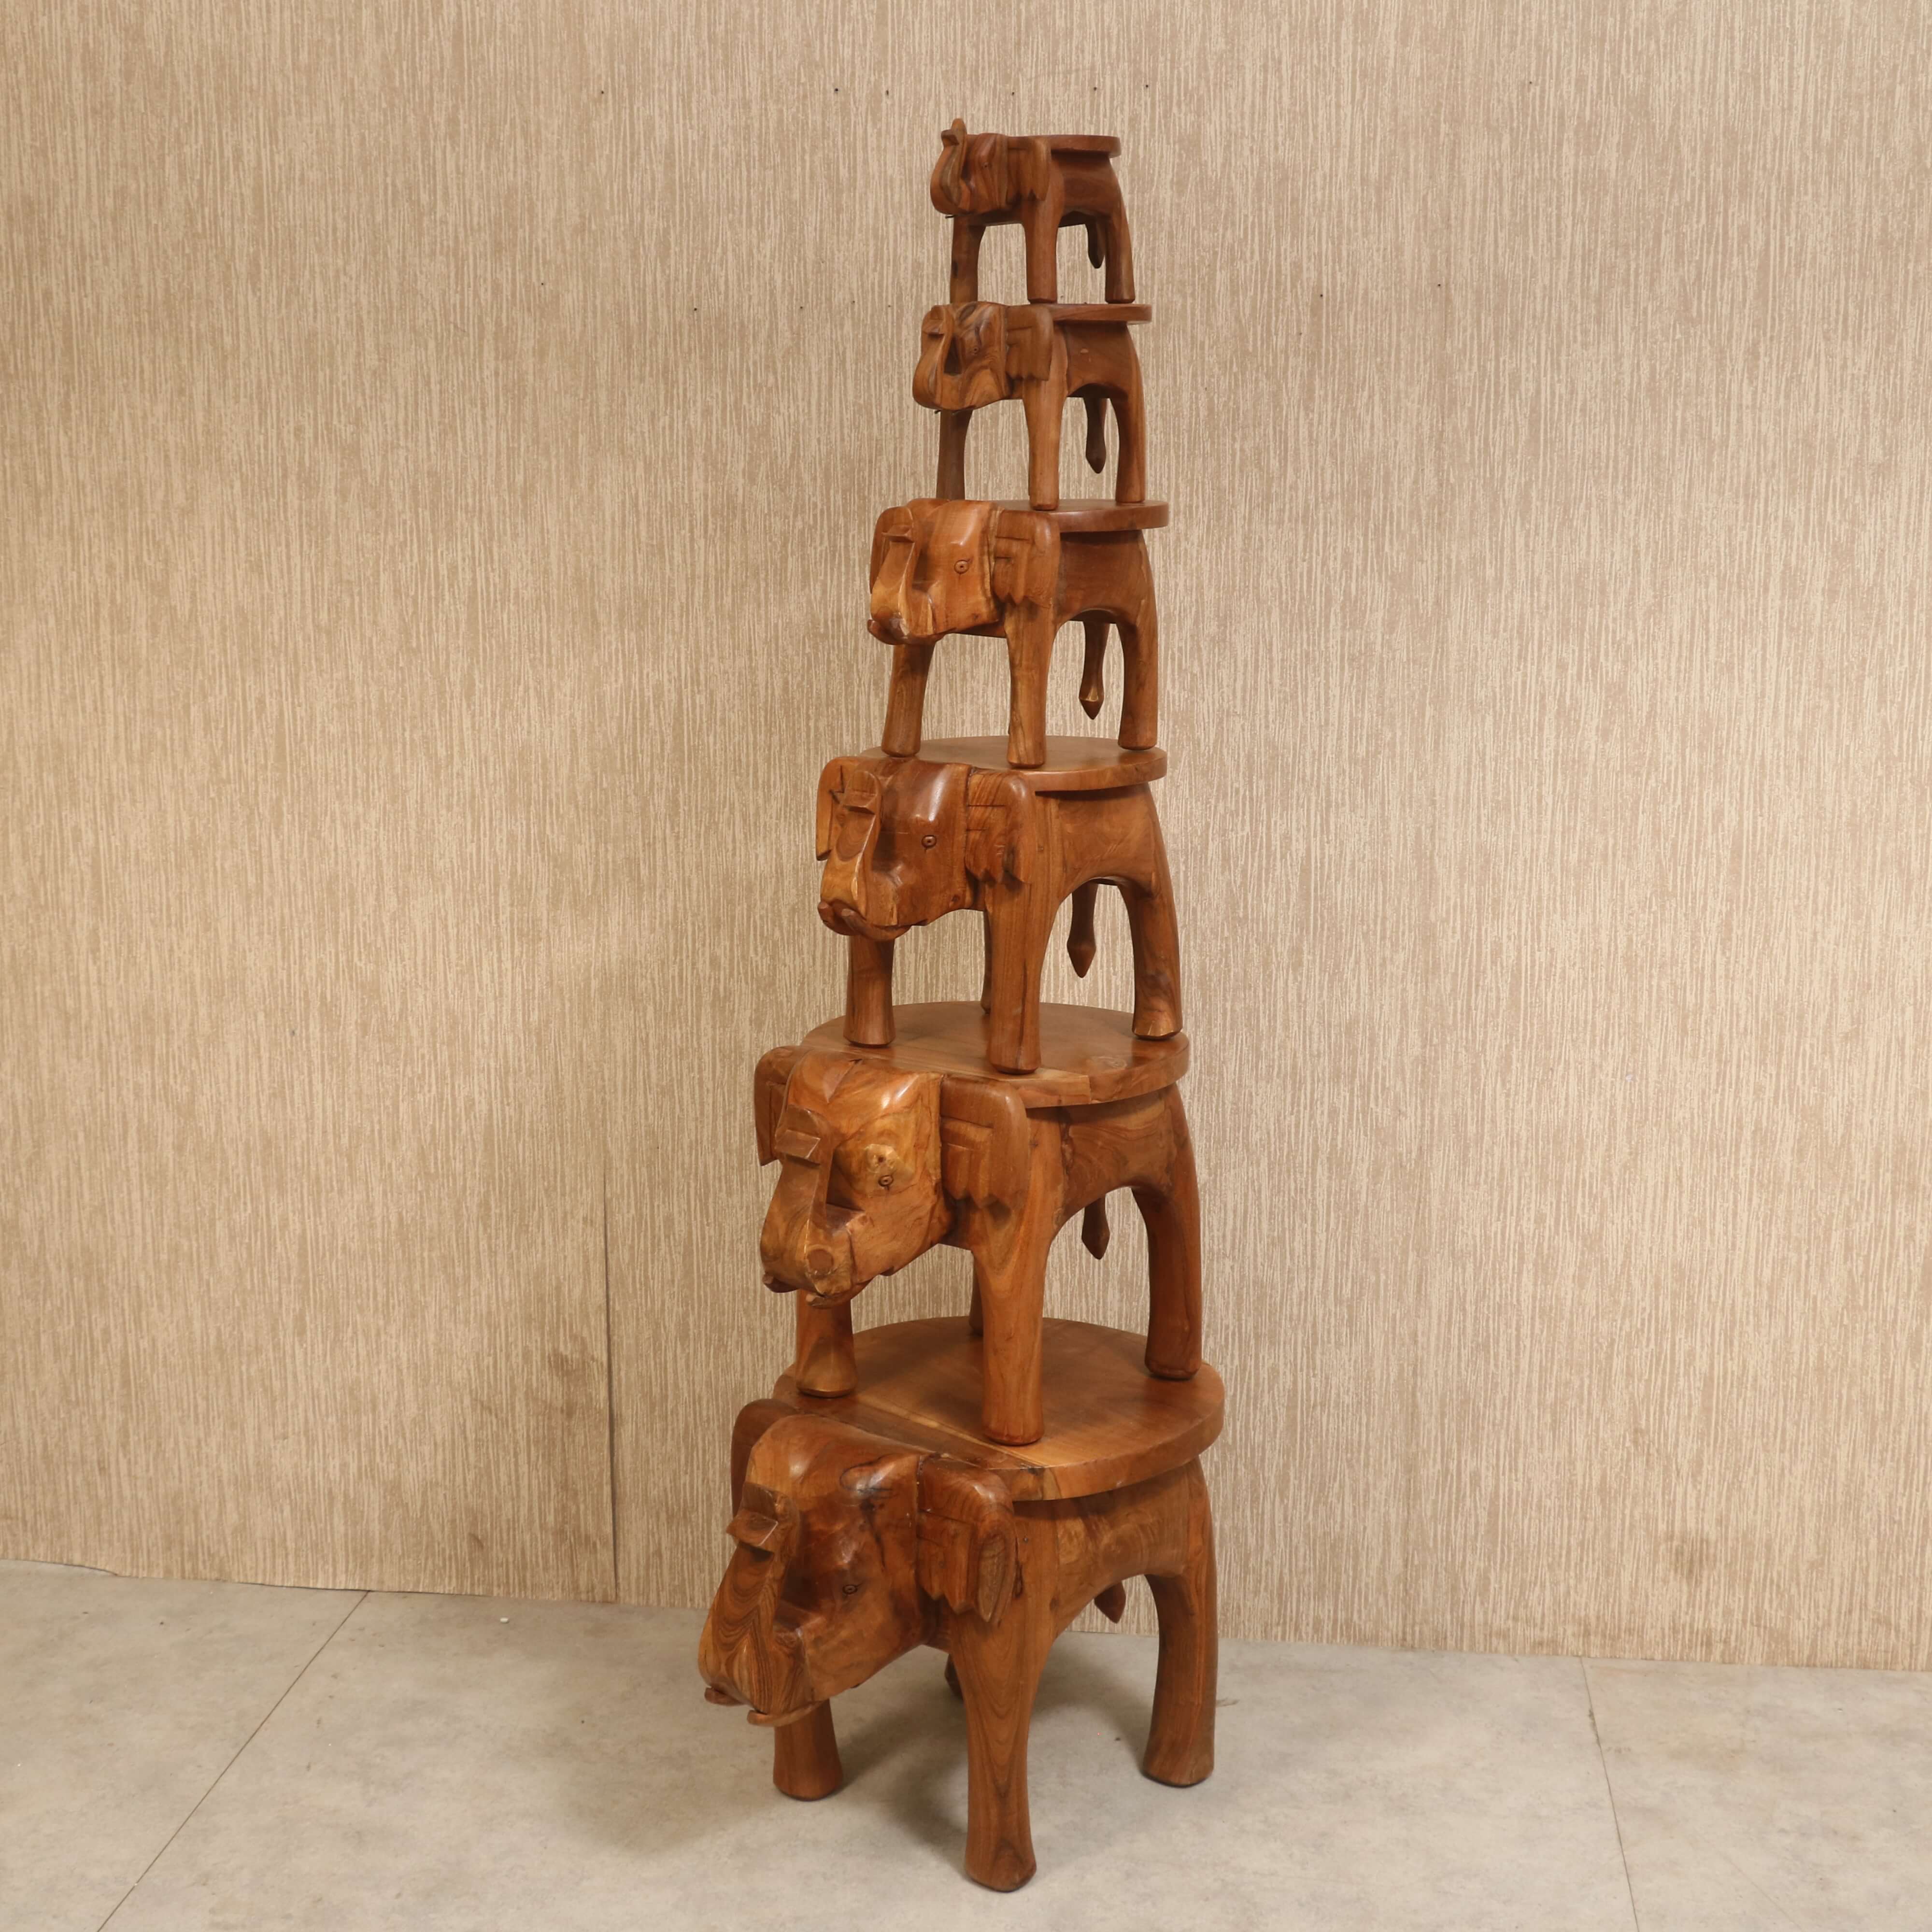 Wooden Tone Elephant Table Stand (Set of 6) Animal Figurine